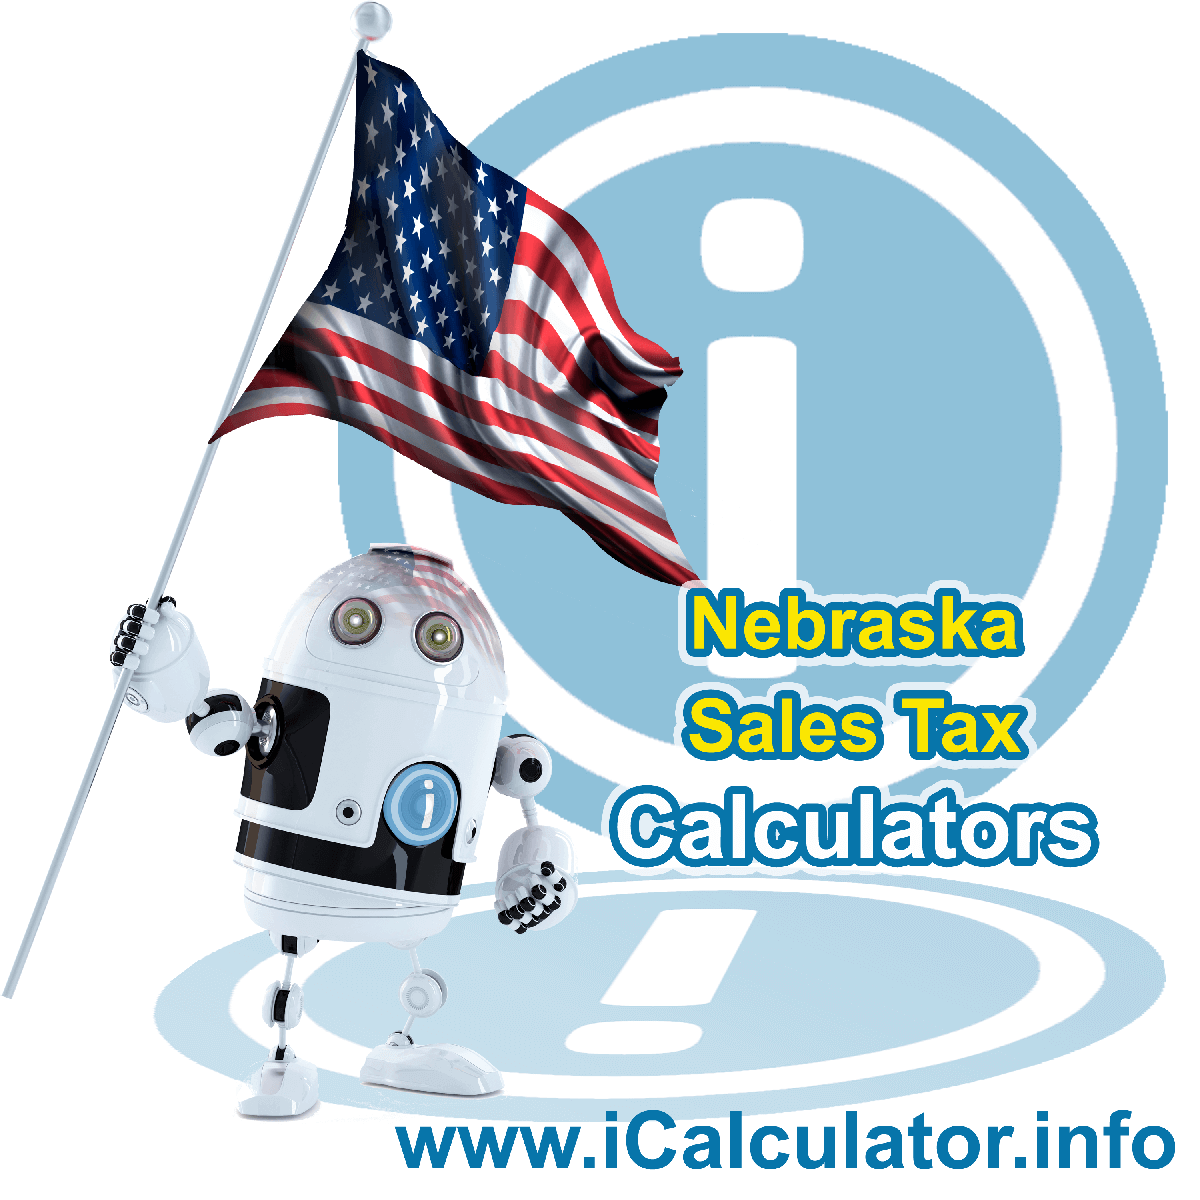 Waterloo Sales Rates: This image illustrates a calculator robot calculating Waterloo sales tax manually using the Waterloo Sales Tax Formula. You can use this information to calculate Waterloo Sales Tax manually or use the Waterloo Sales Tax Calculator to calculate sales tax online.